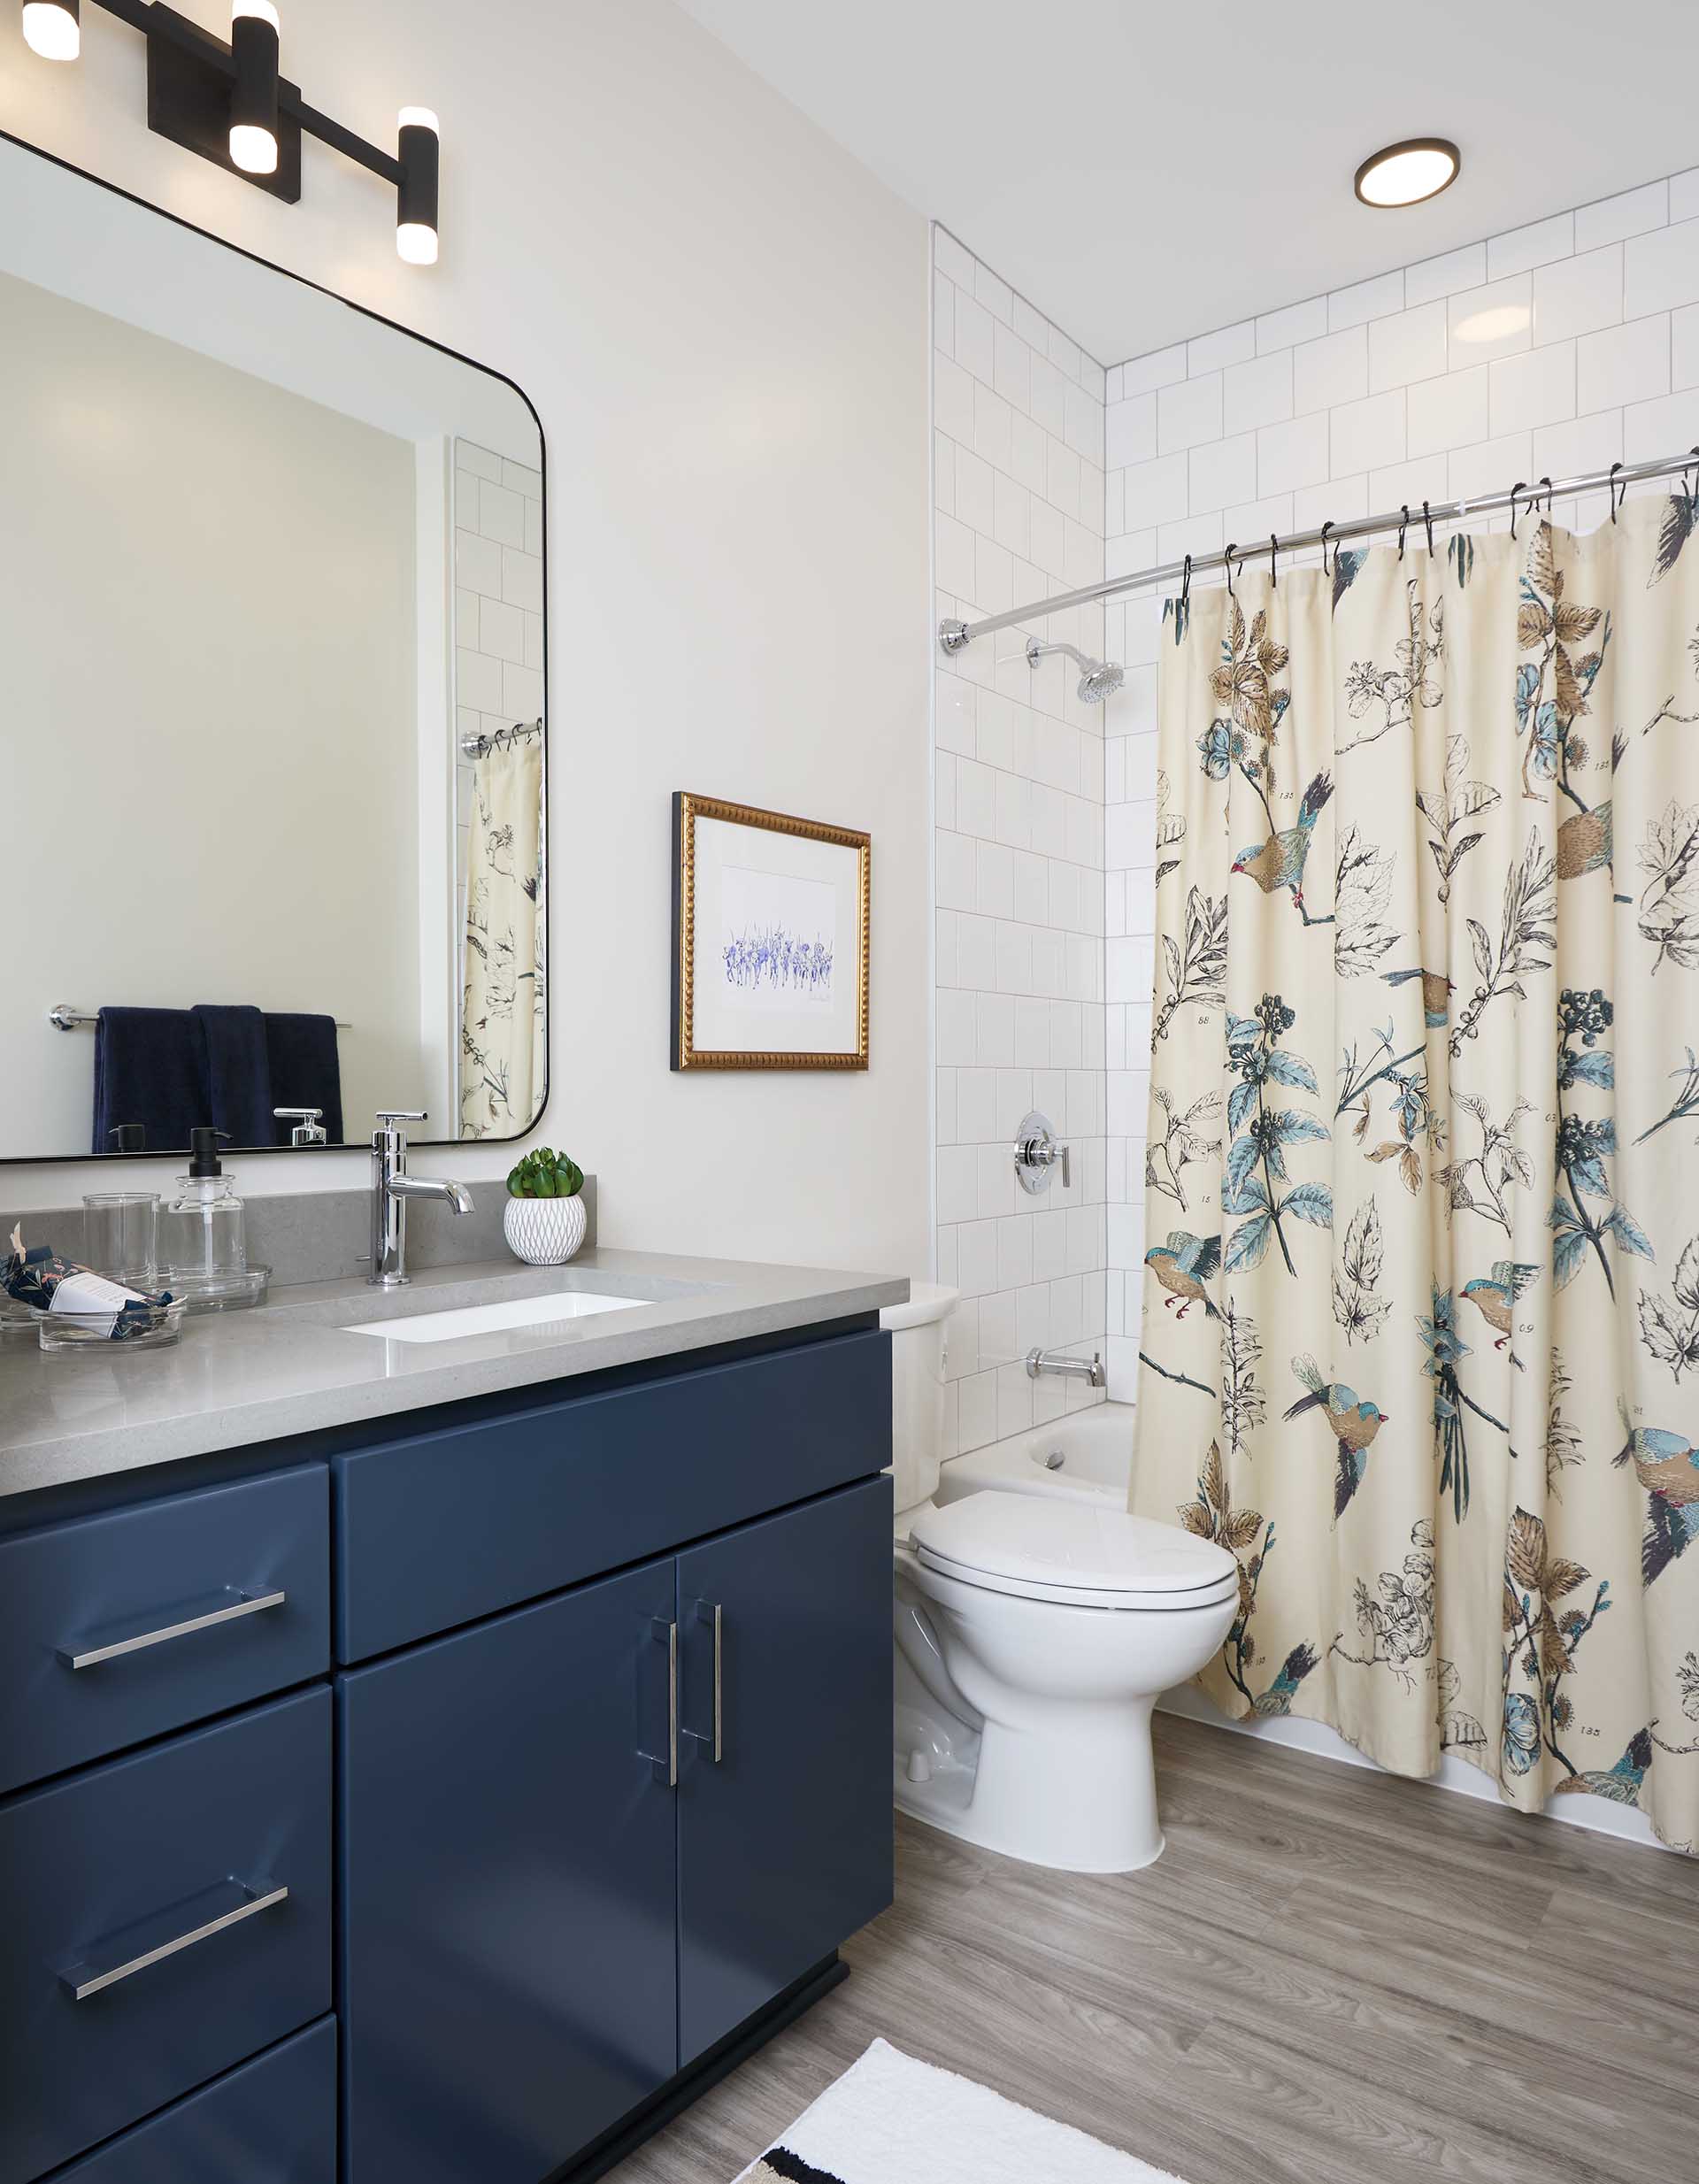 Spacious bathrooms with ample cabinetry and quartz countertops